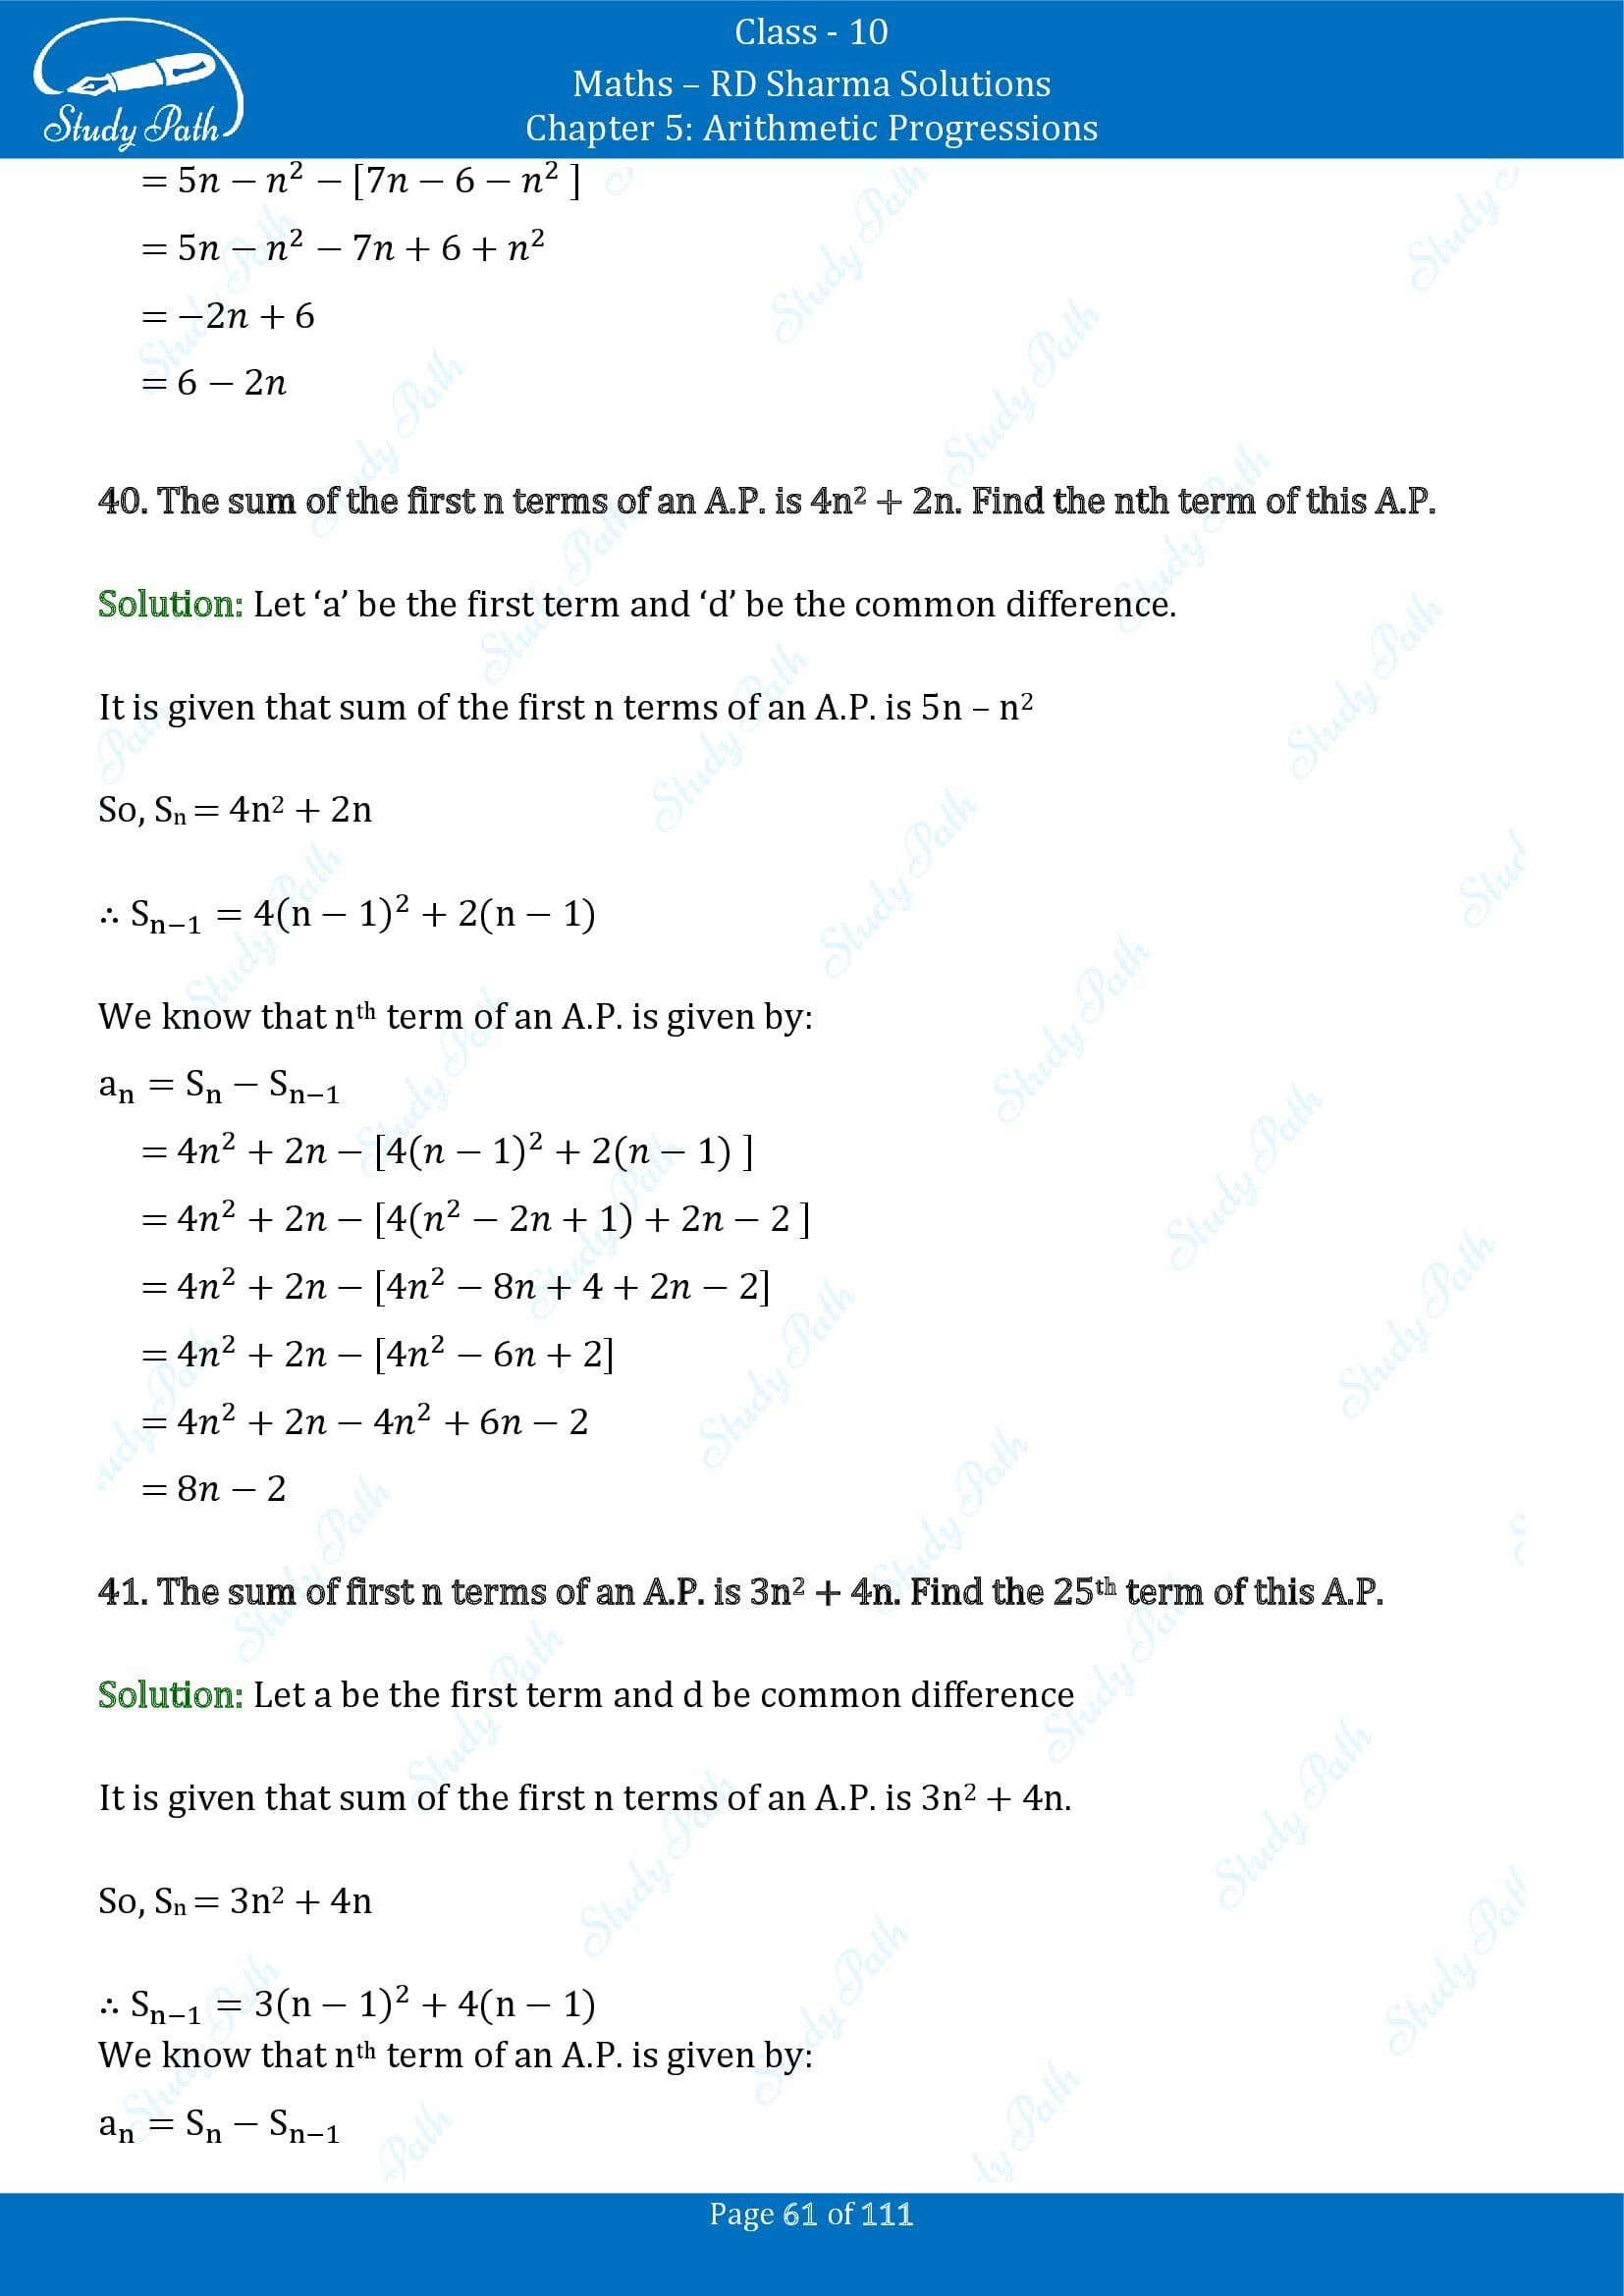 RD Sharma Solutions Class 10 Chapter 5 Arithmetic Progressions Exercise 5.6 00061